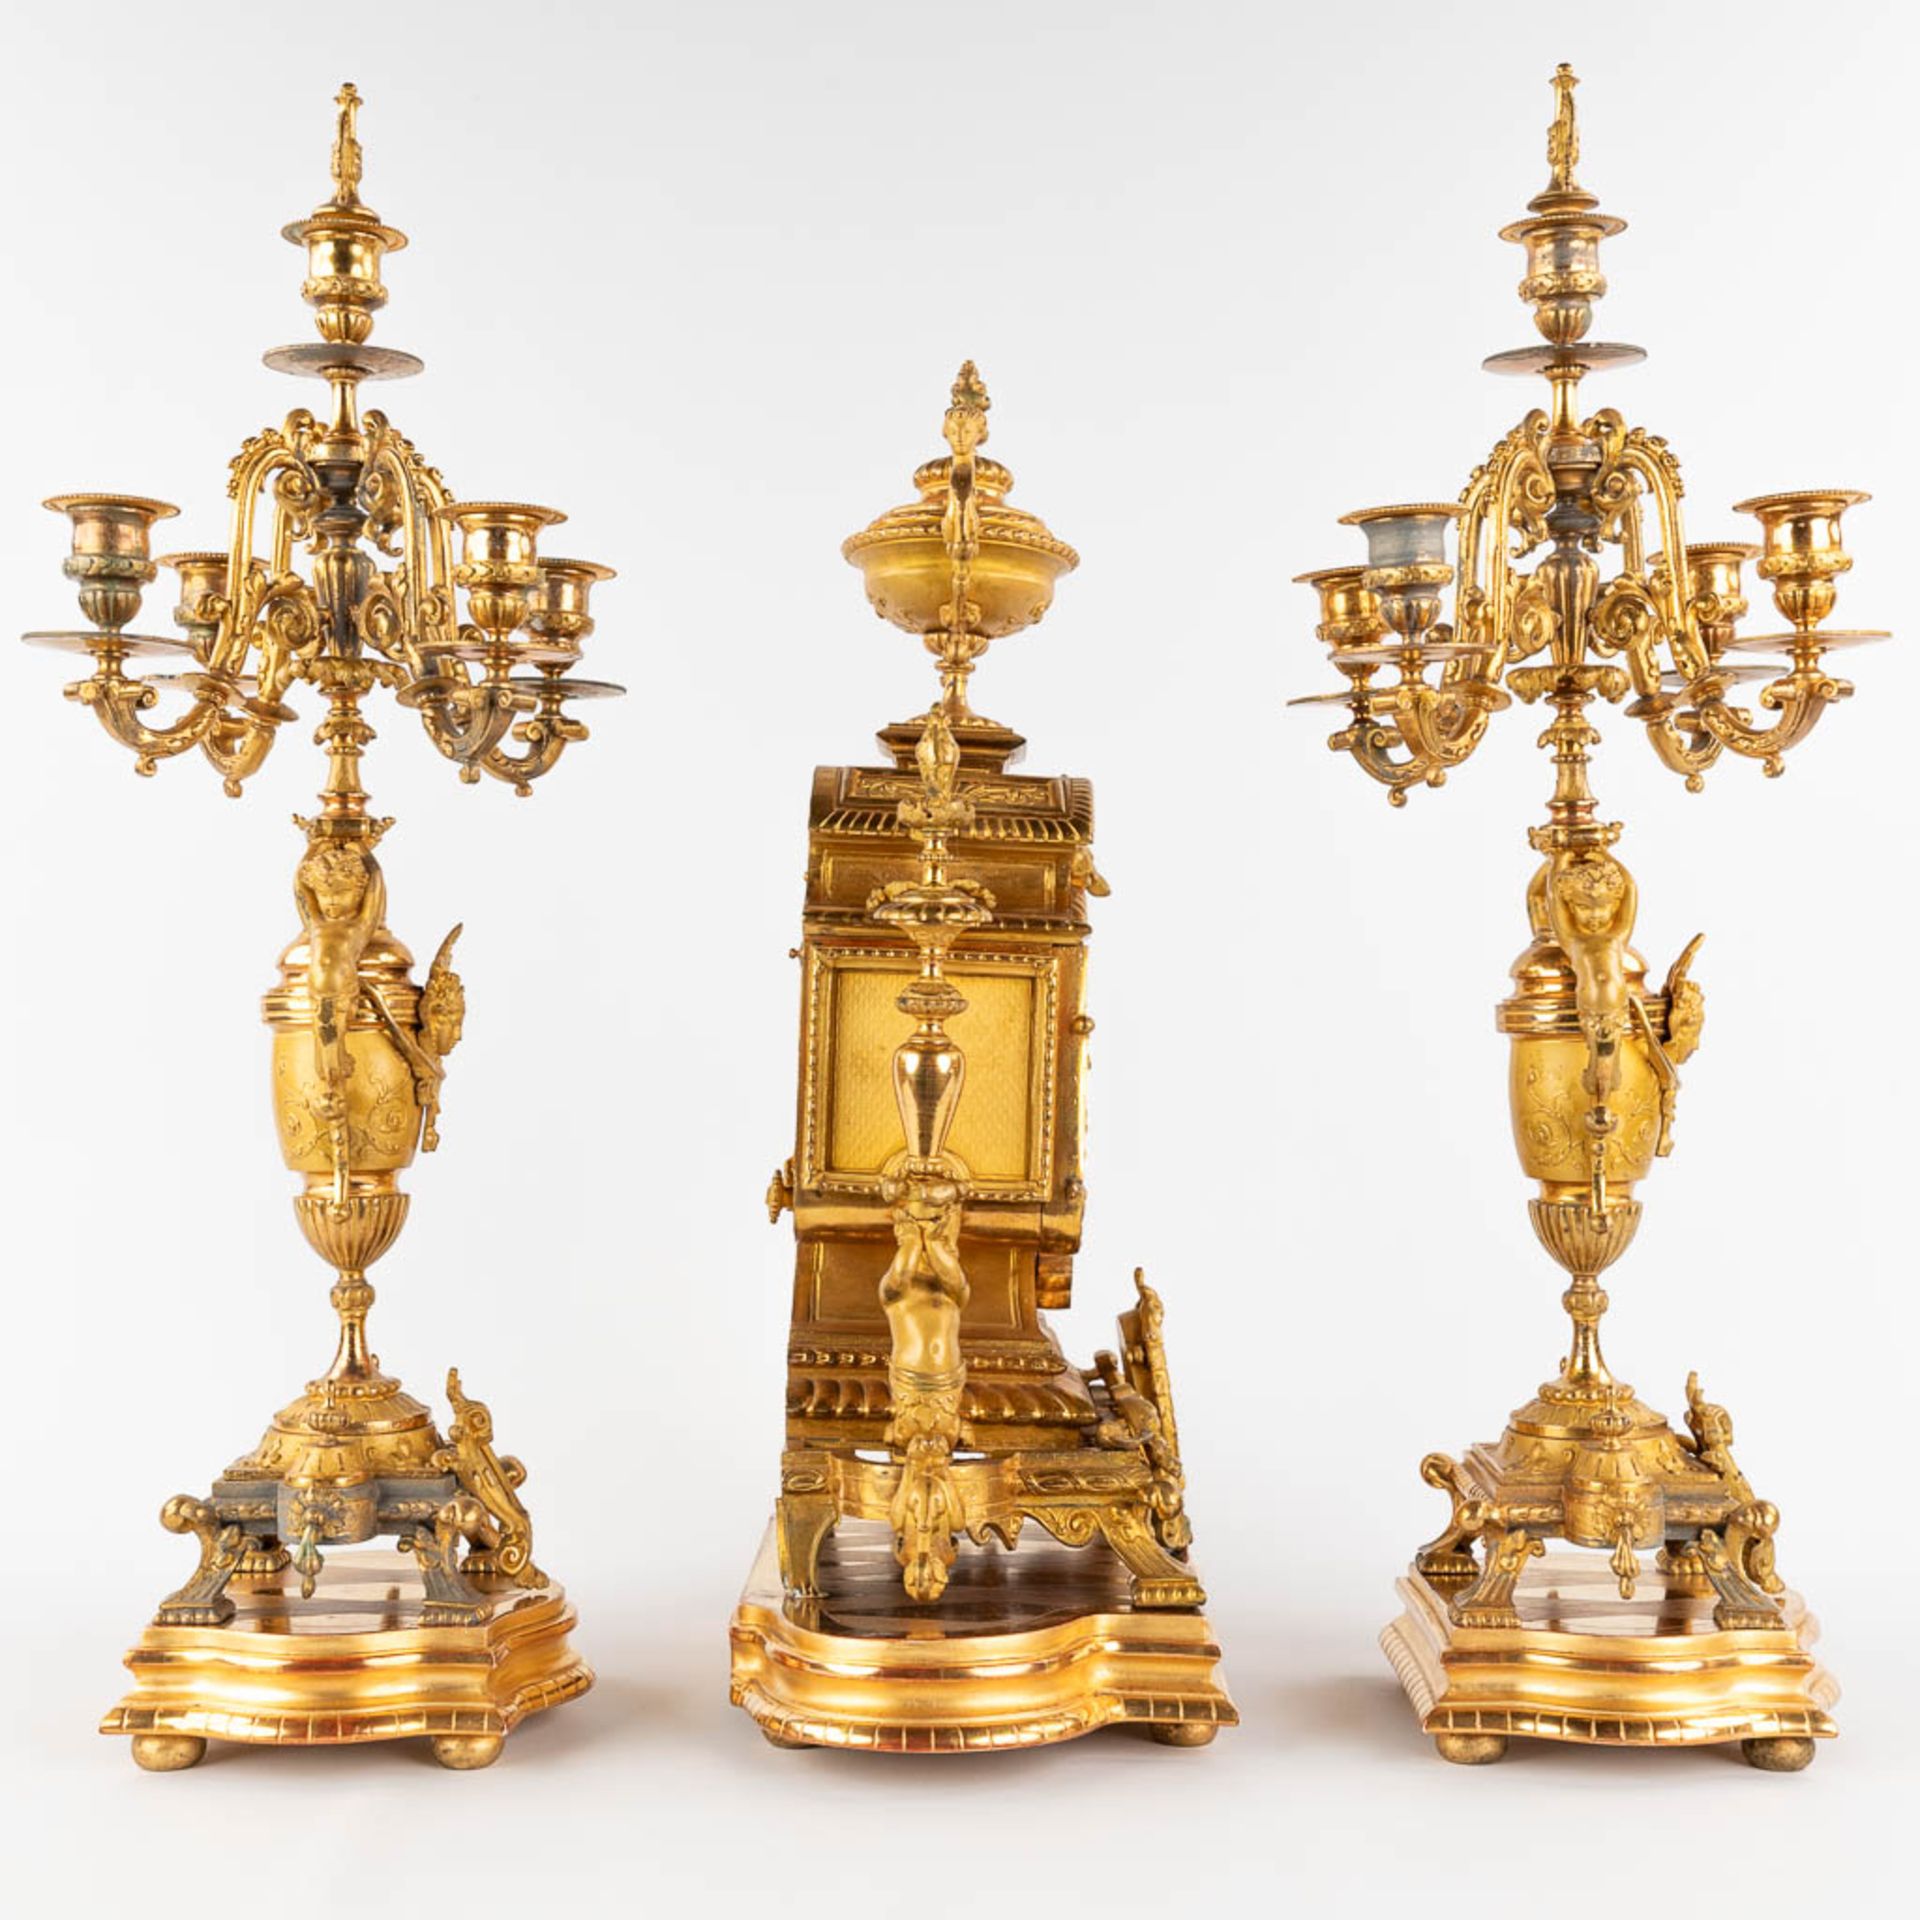 A three-piece mantle garniture clock and candelabra, gilt spelter, decorated with putti. Circa 1900. - Image 4 of 19